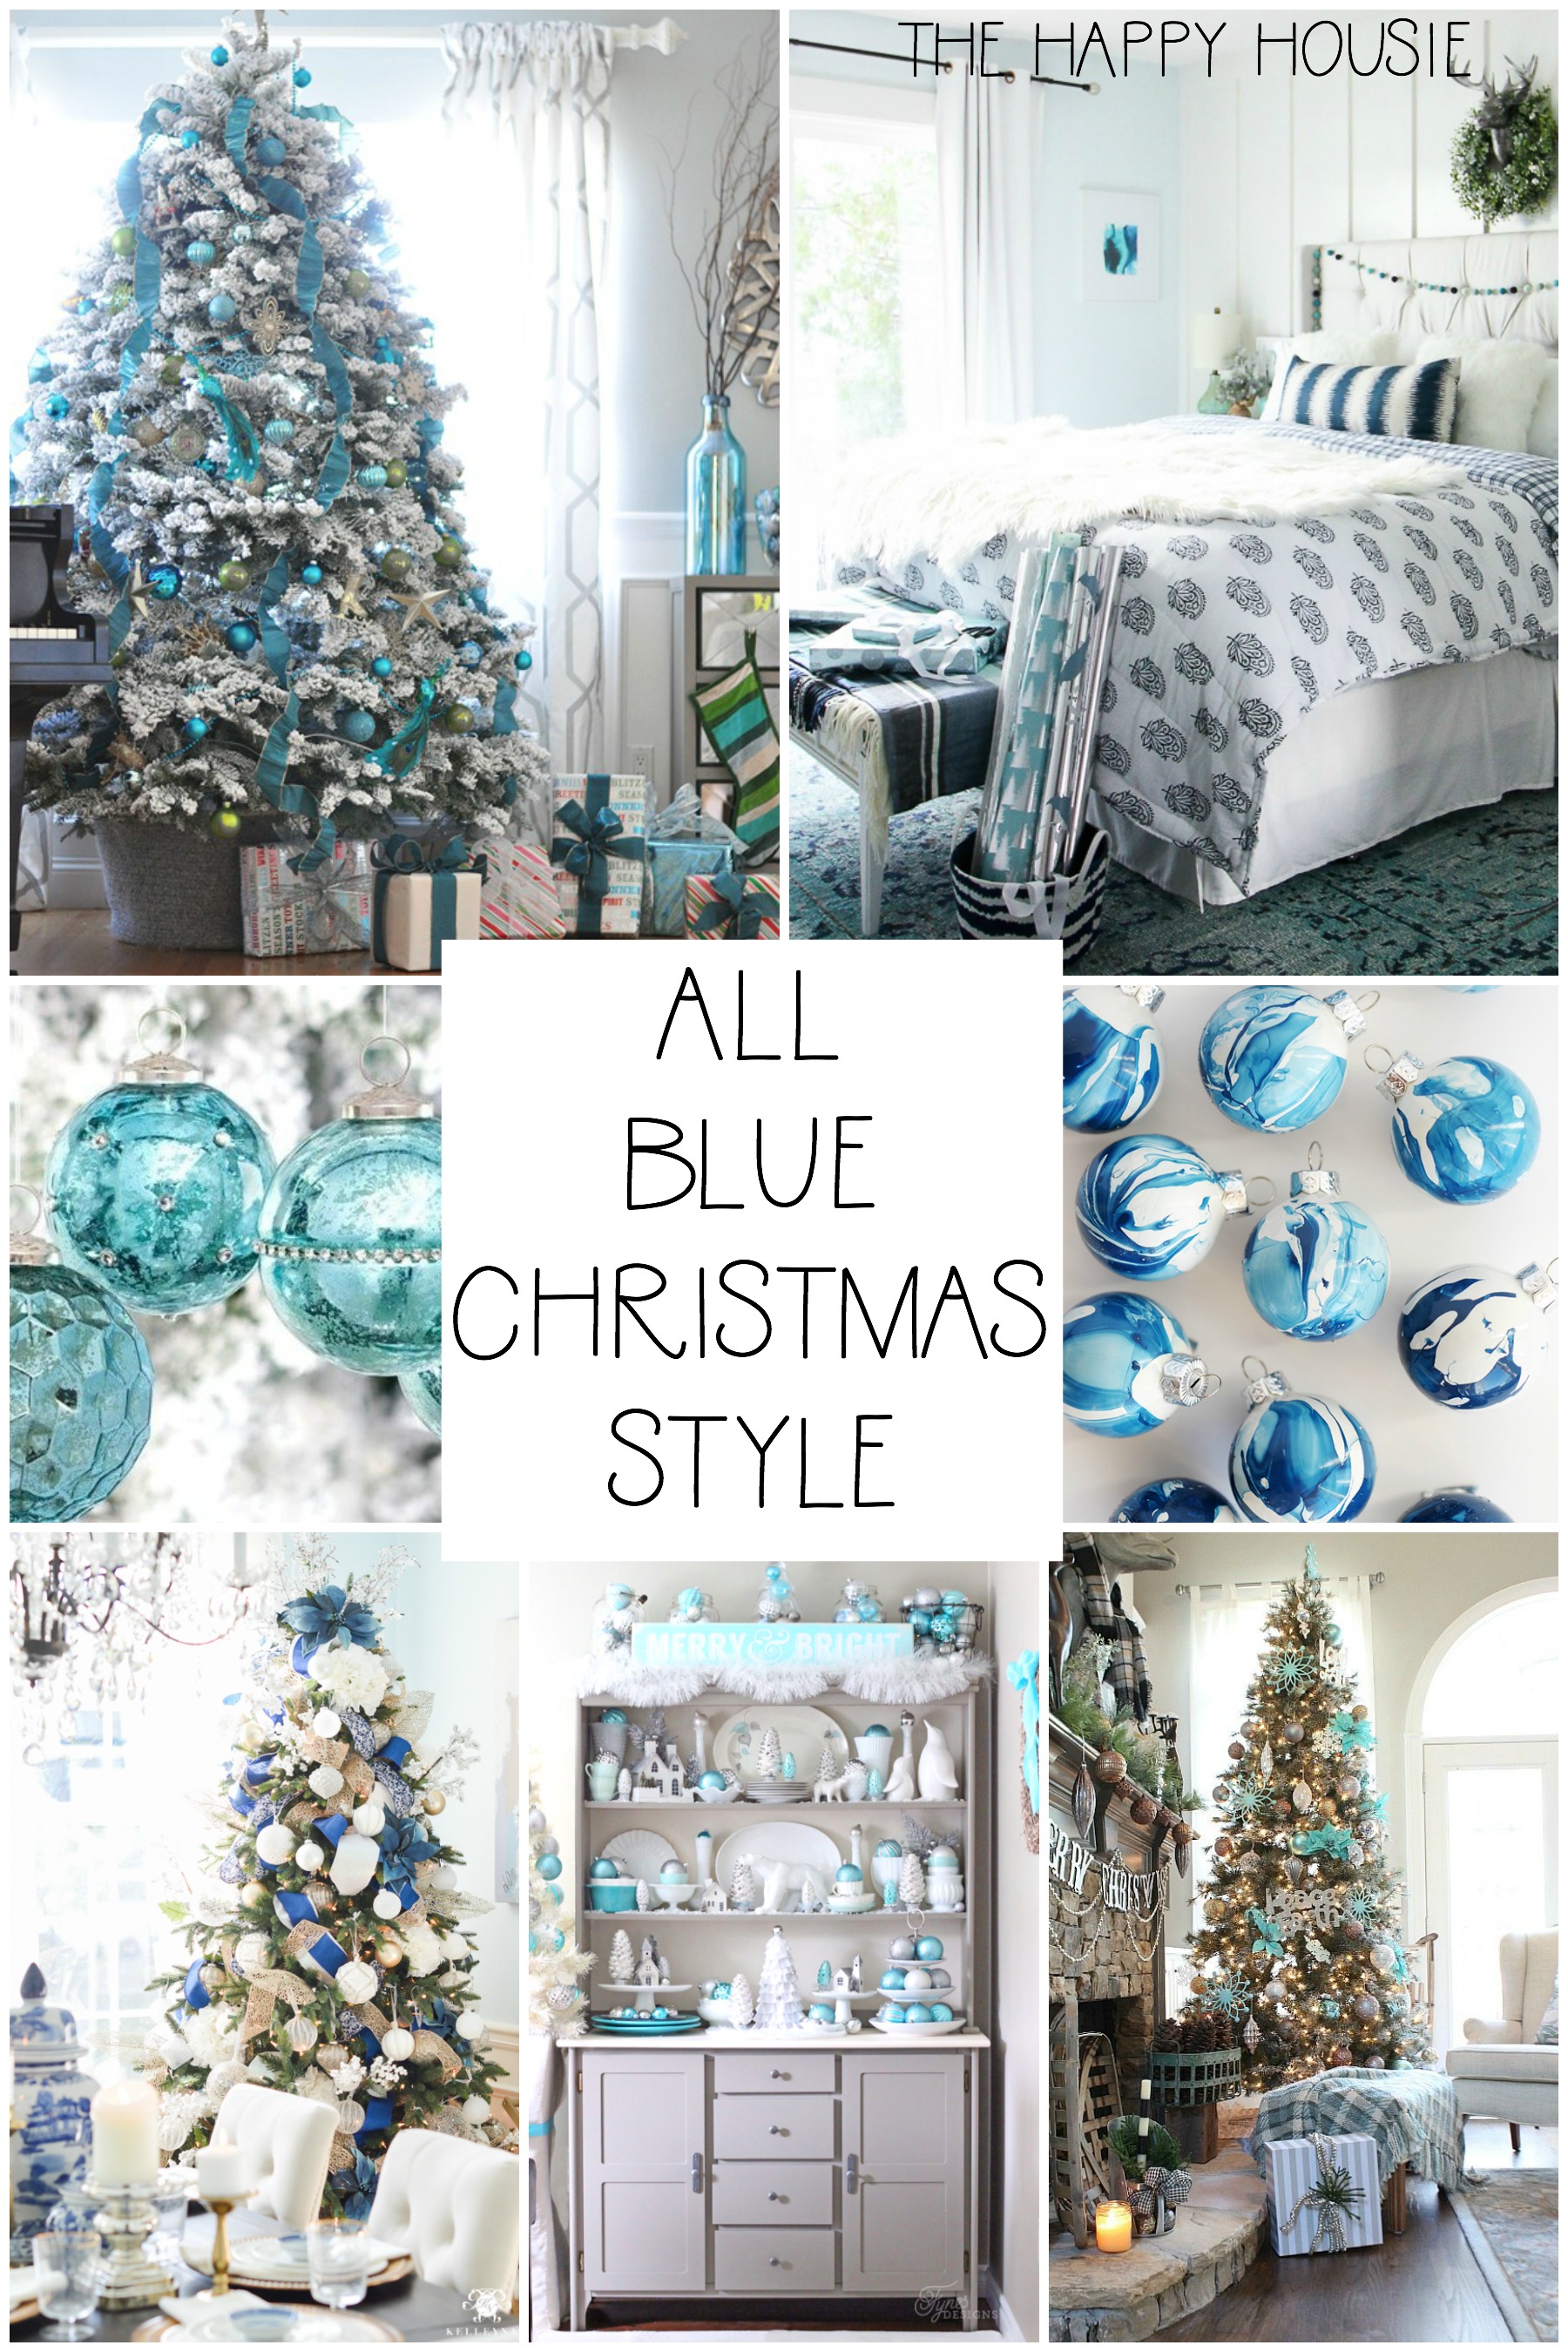 All Blue Christmas Style poster.